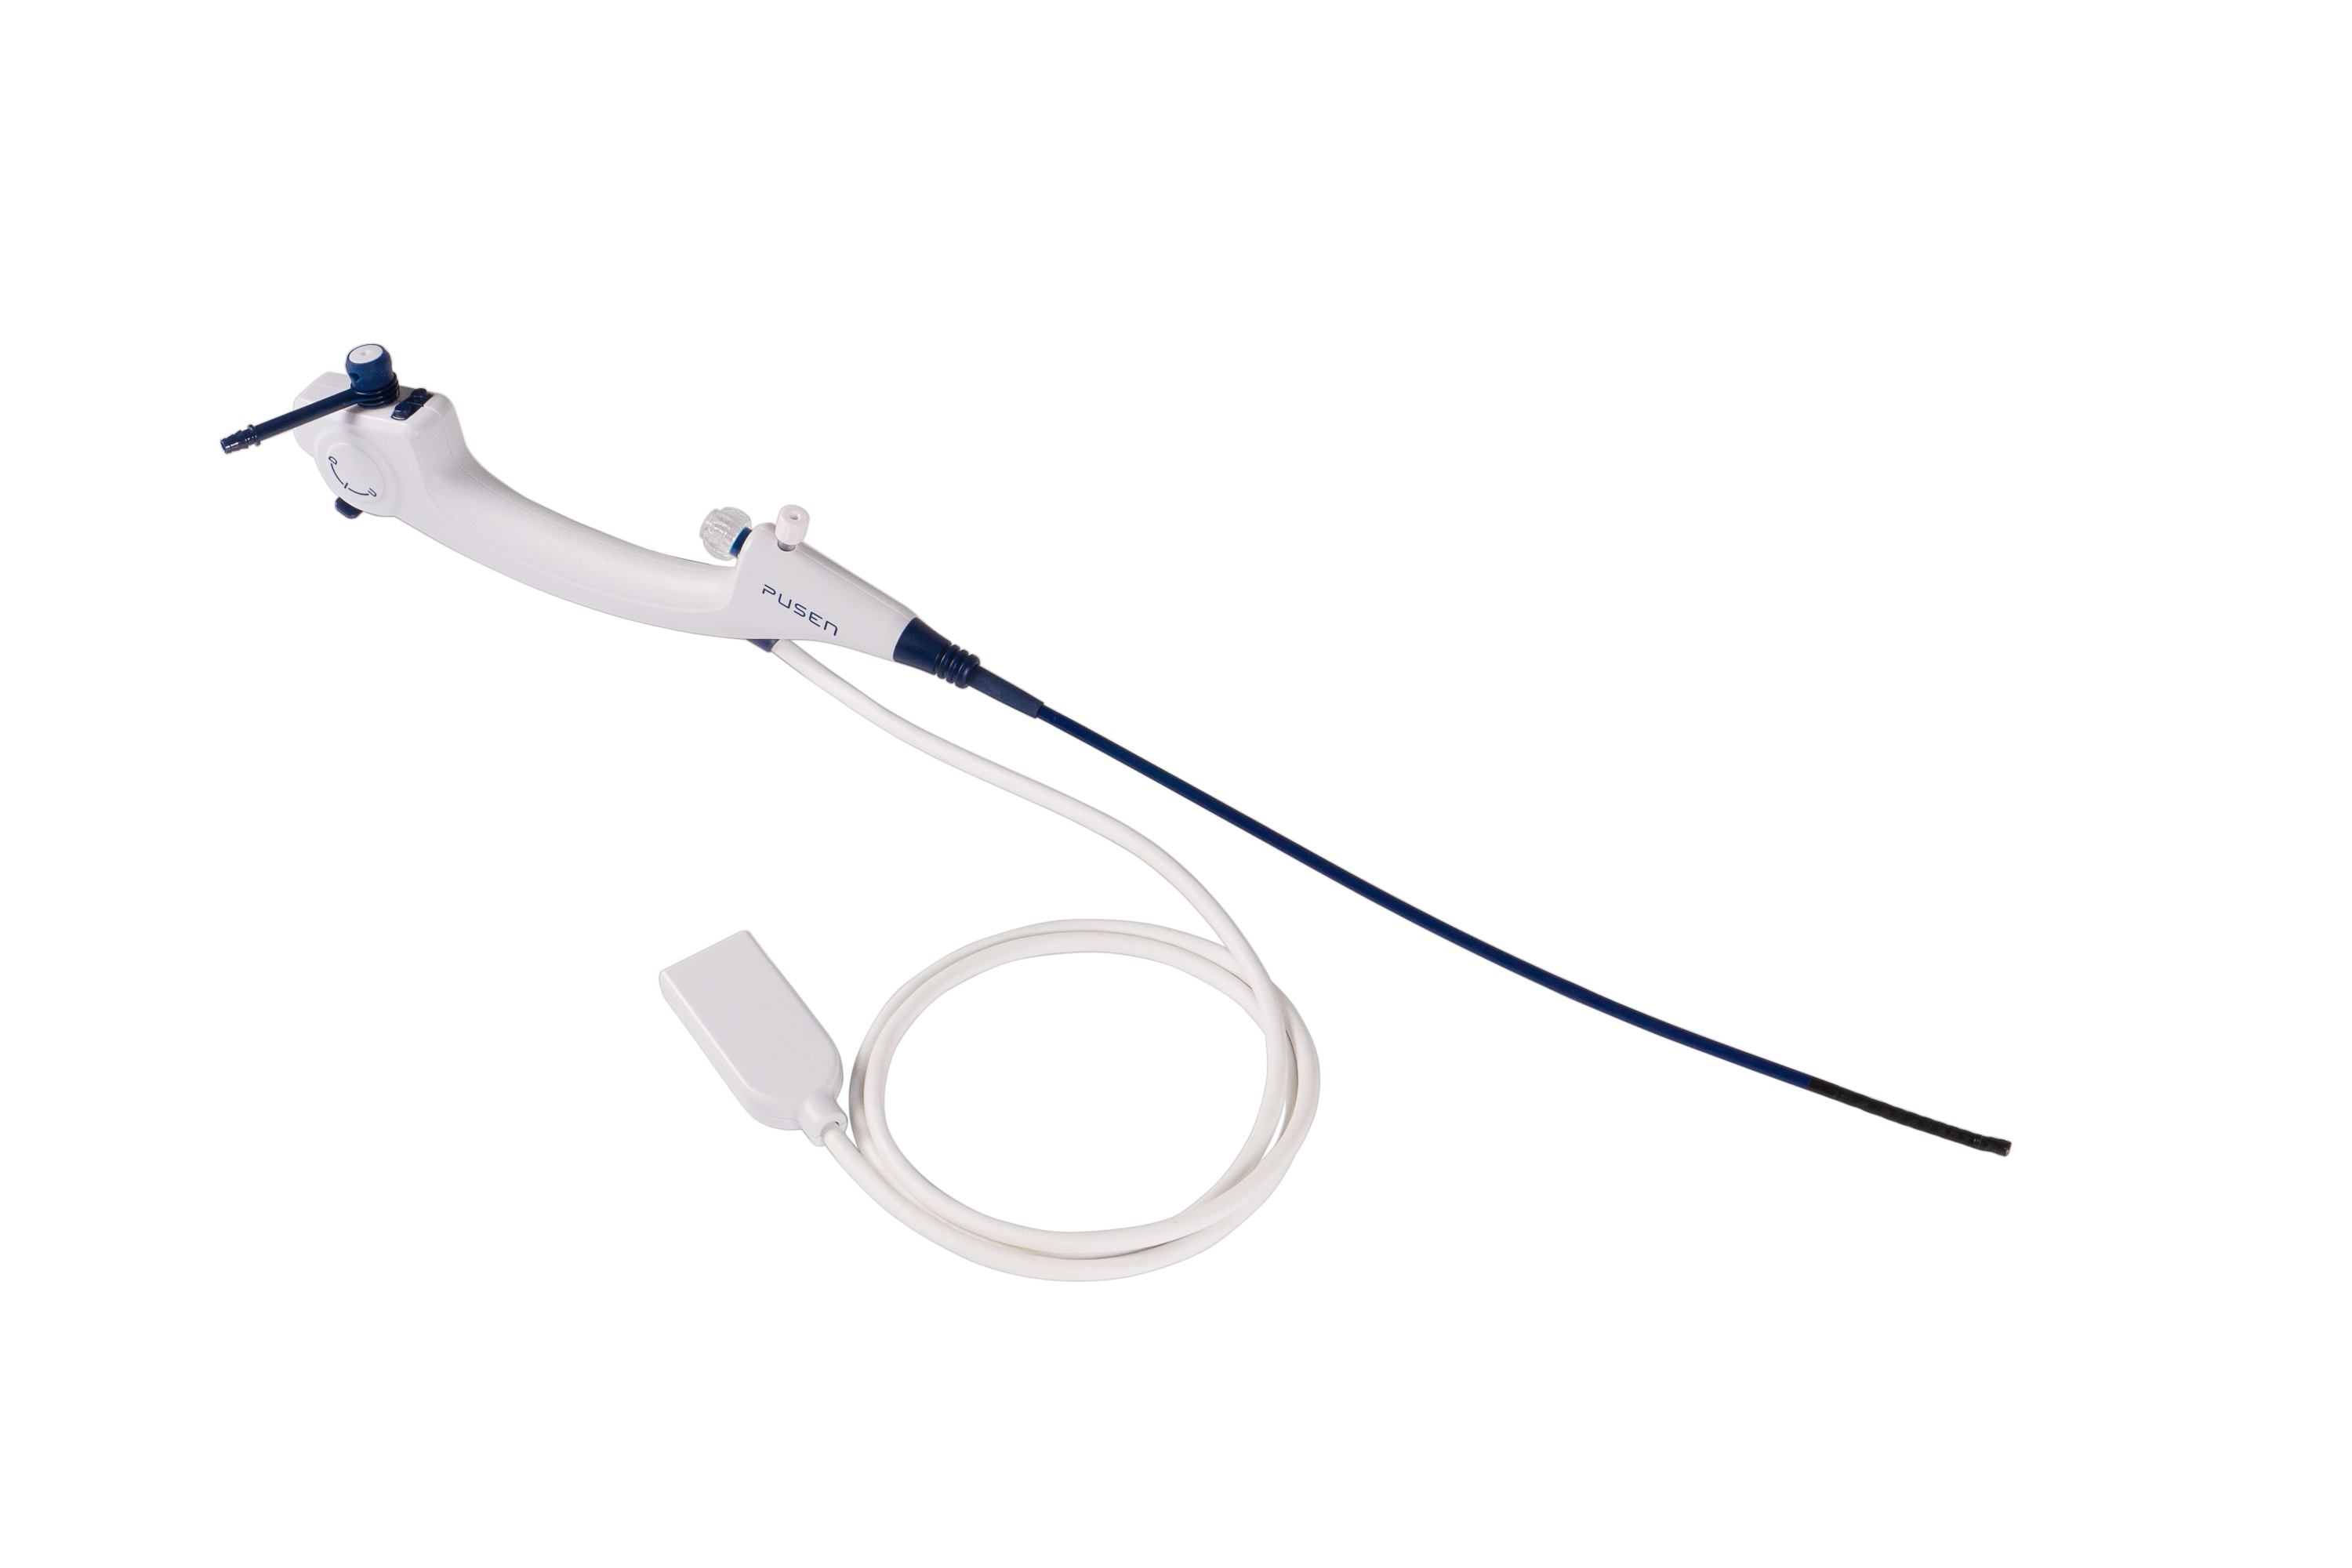 C-Scope 15.0 Fr with Direct In-Scope Suction (DISS)